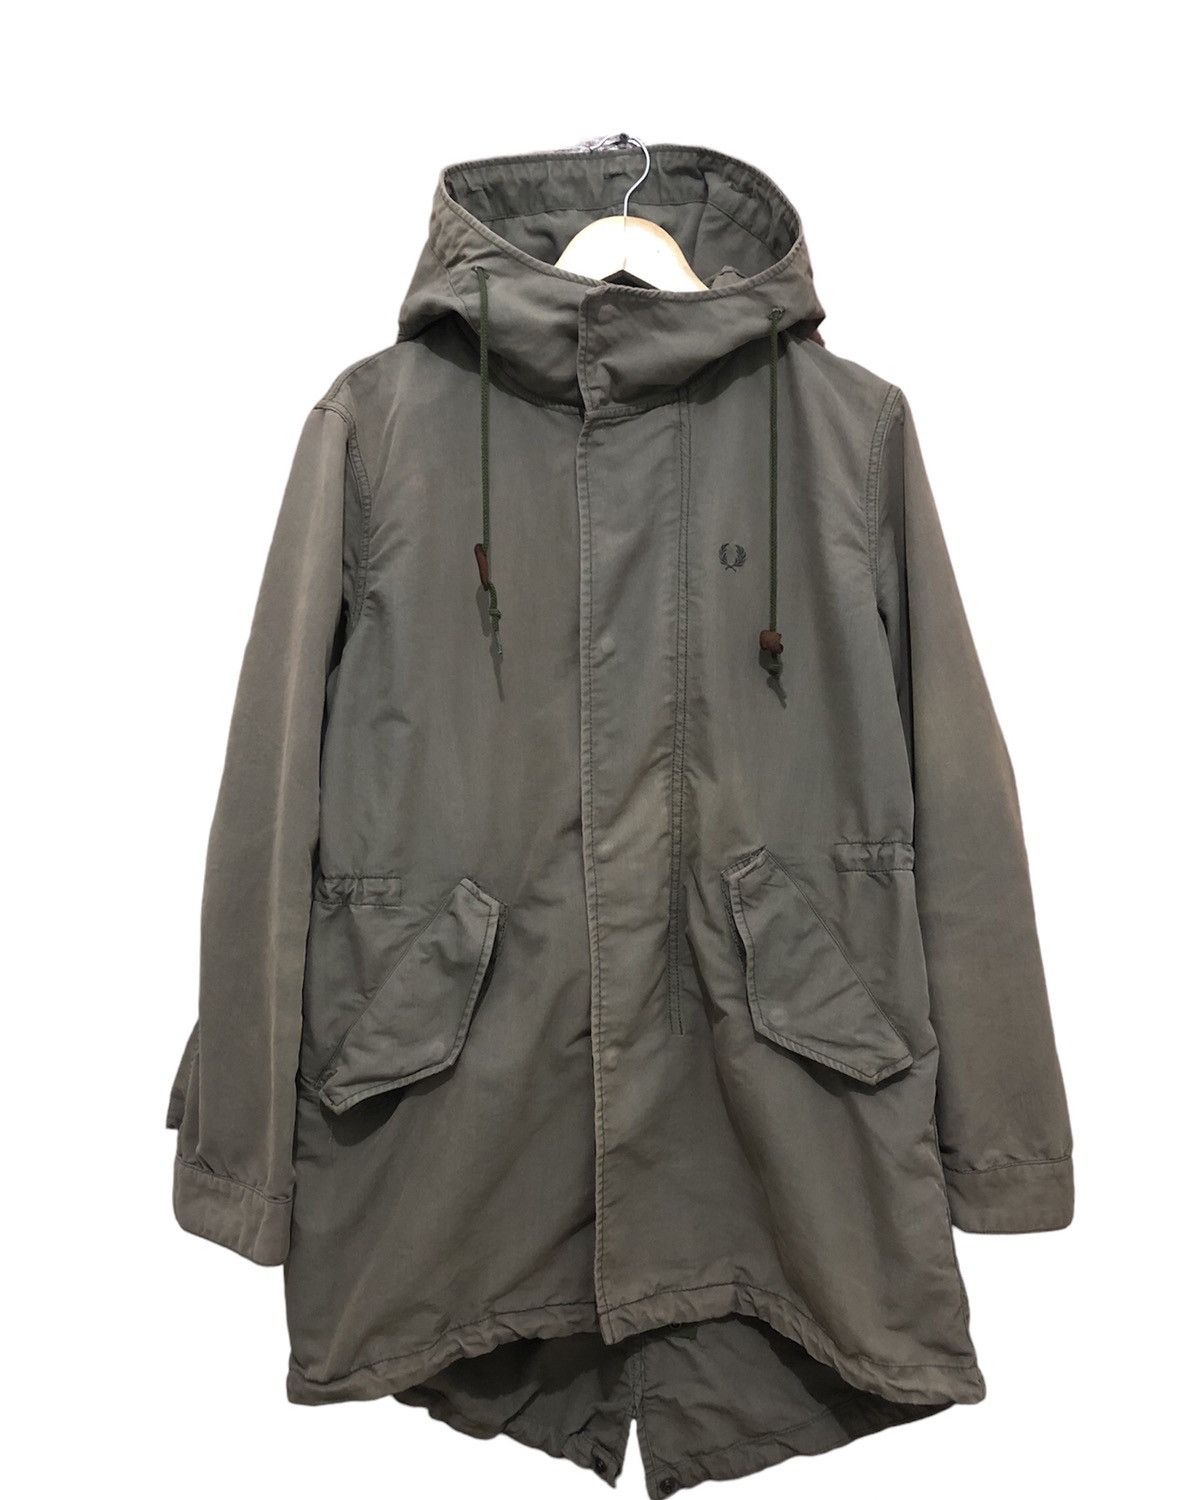 Fred Perry Military Fishtail Jacket - 1